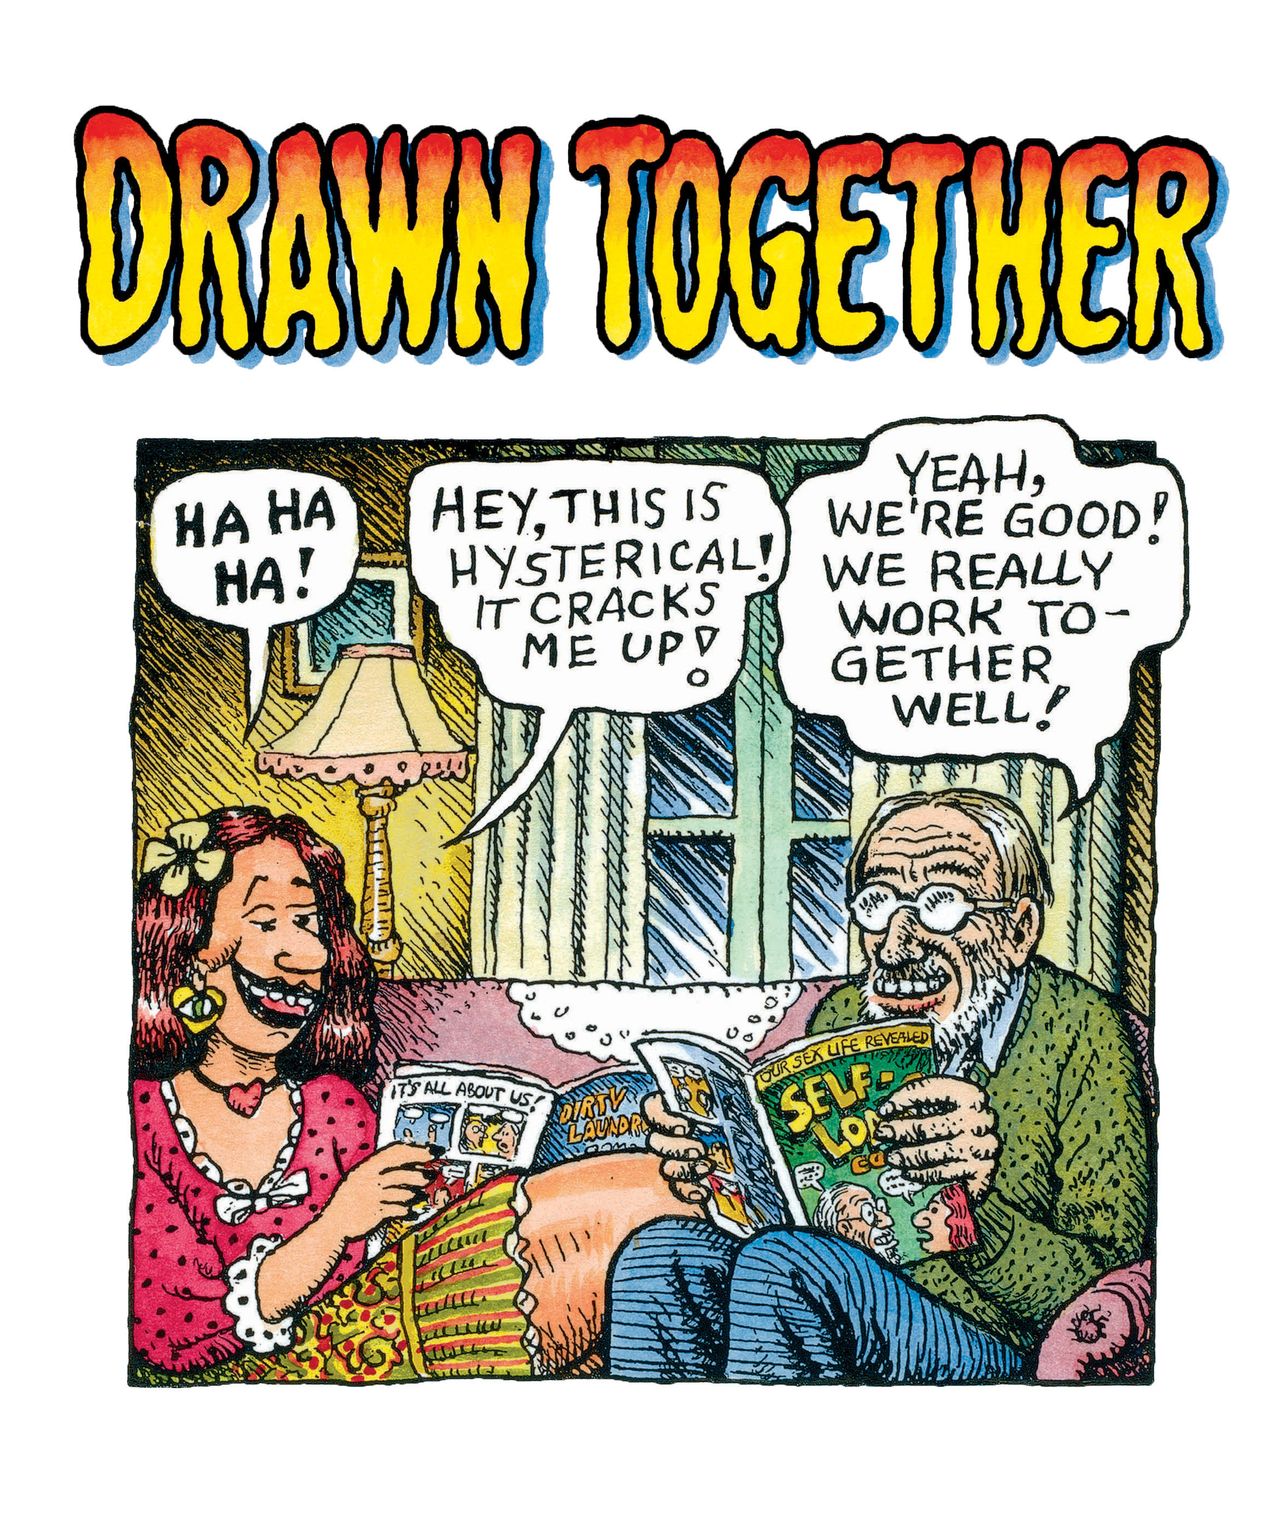 Aline Kominsky-Crumb & Robert Crumb, "<em>Drawn Together</em>," Cartoon Museum Basel, 2016, ink and watercolor on paper, Poster for the exhibition. Courtesy of the artists